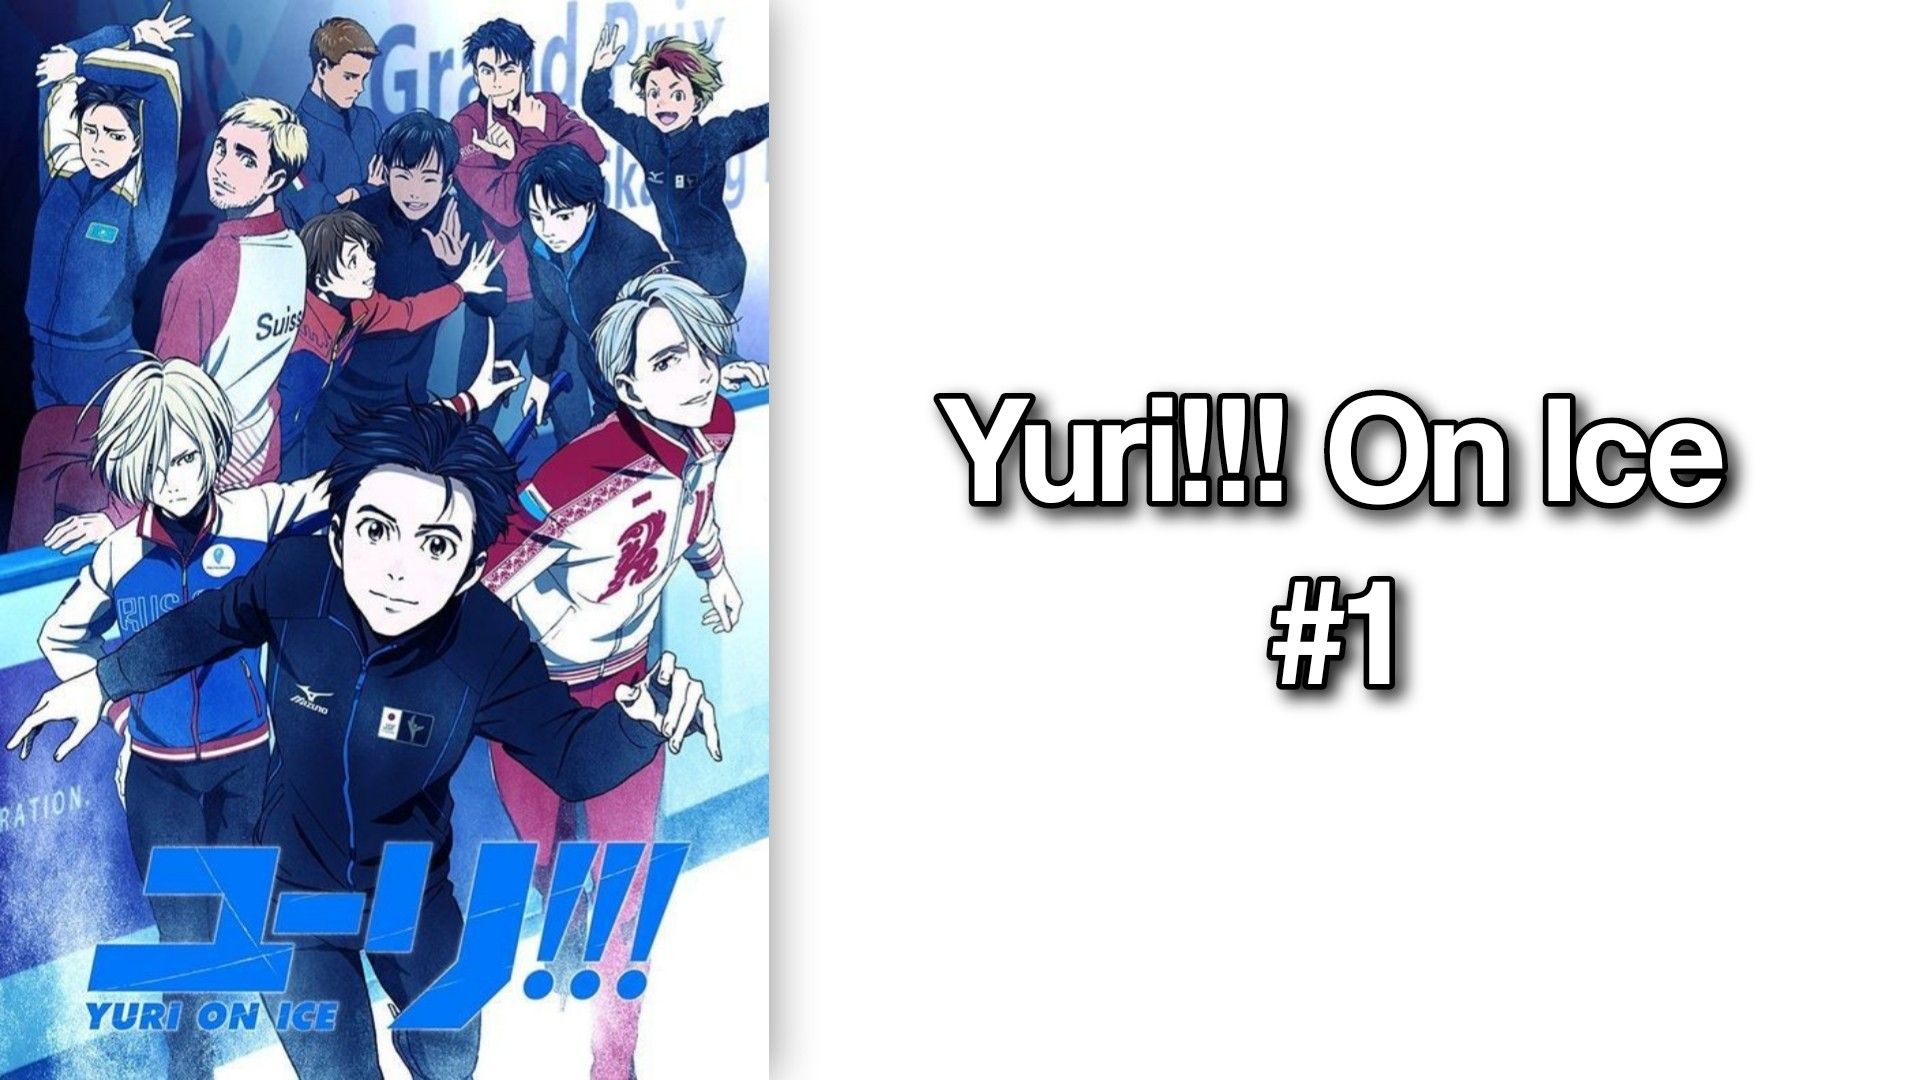 Yuri on Ice' Is the Most Popular Anime on Twitter